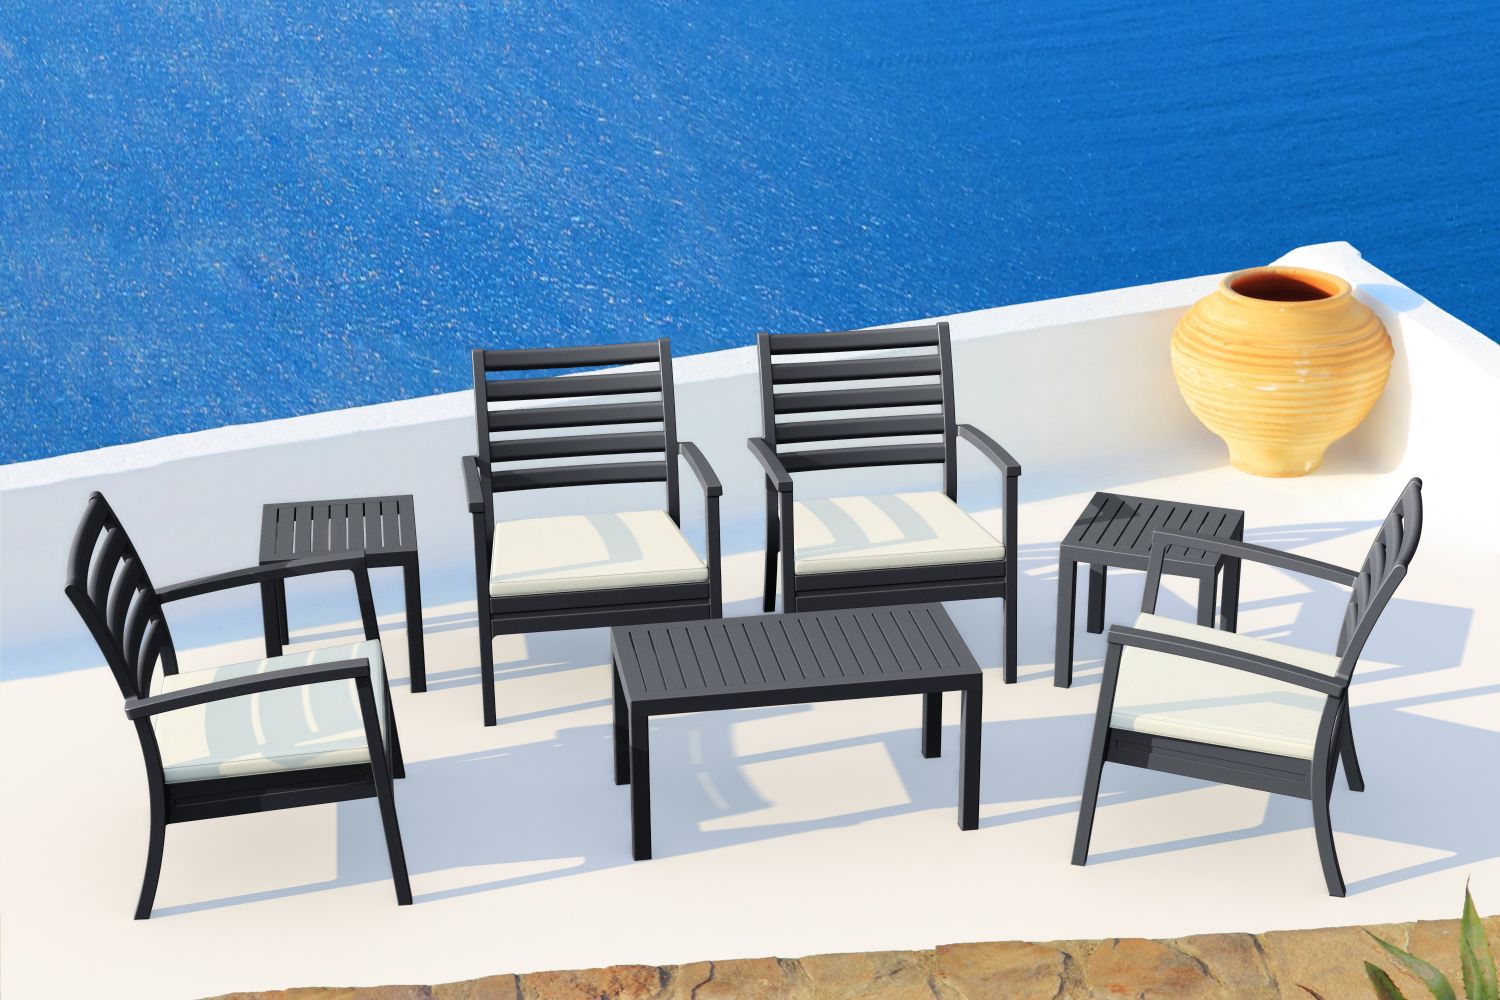 Artemis XL Club Seating set 7 Piece White - Charcoal ISP004S7-WHI-CCH - 2